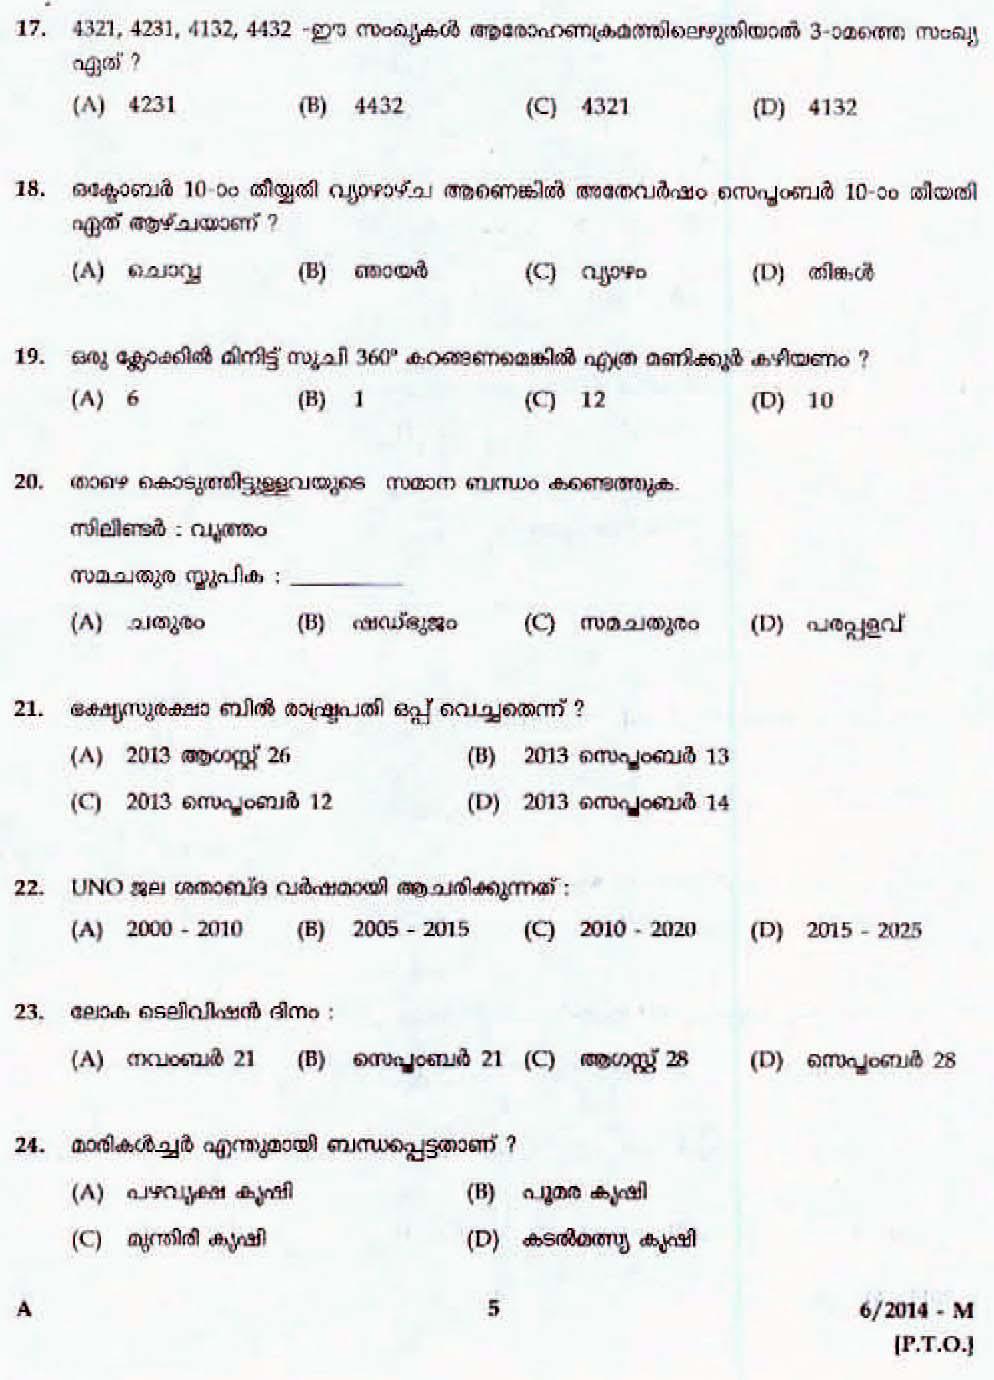 LD Clerk Question Paper Malayalam 2014 Paper Code 062014 M 3